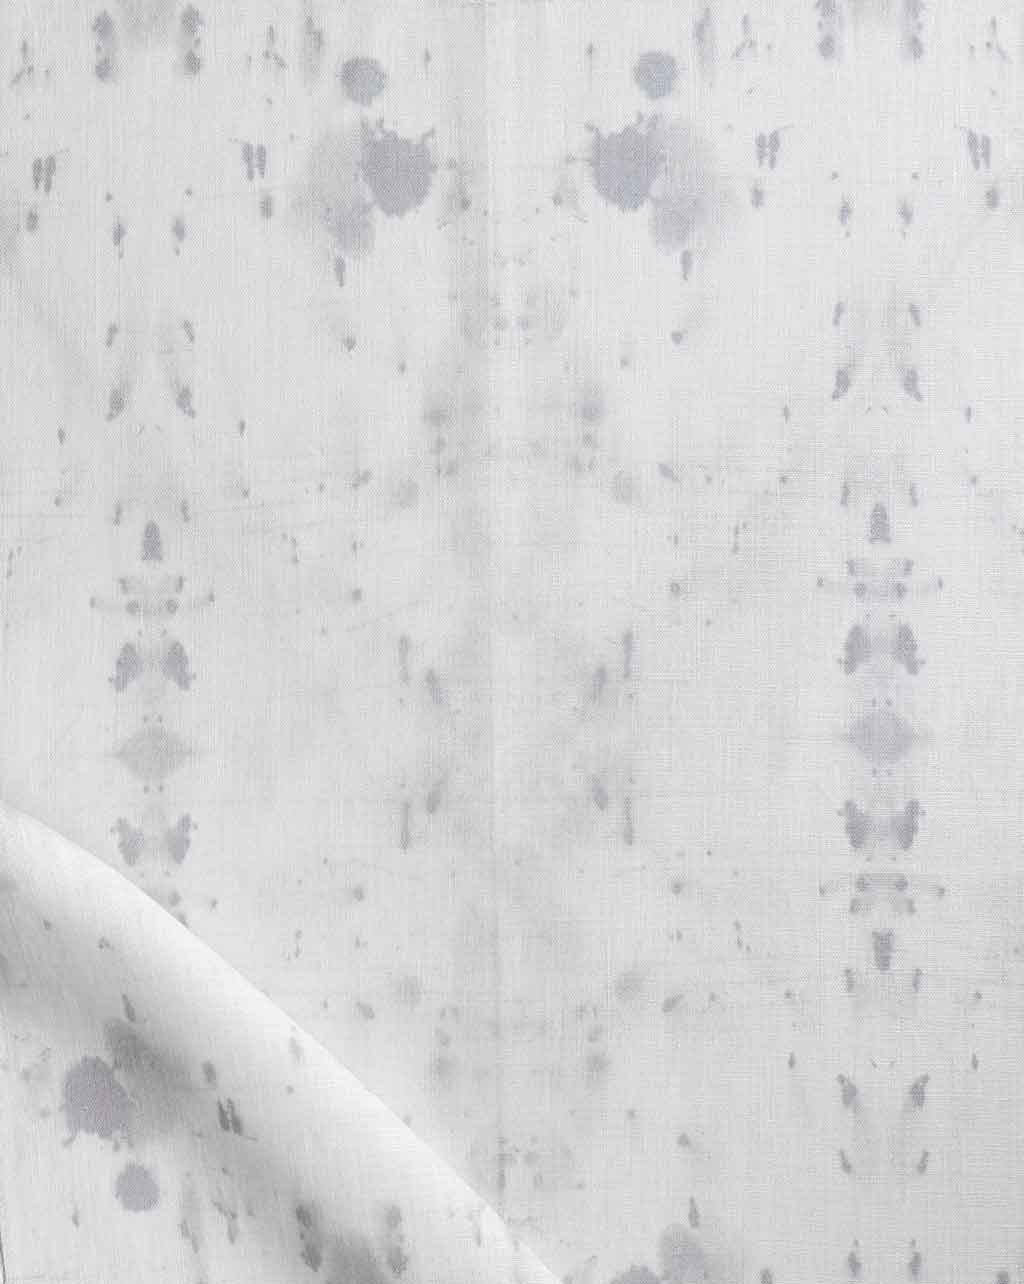 An image of a white and gray fabric with splotches on it from the Nairutya Fabric Chalk colorway